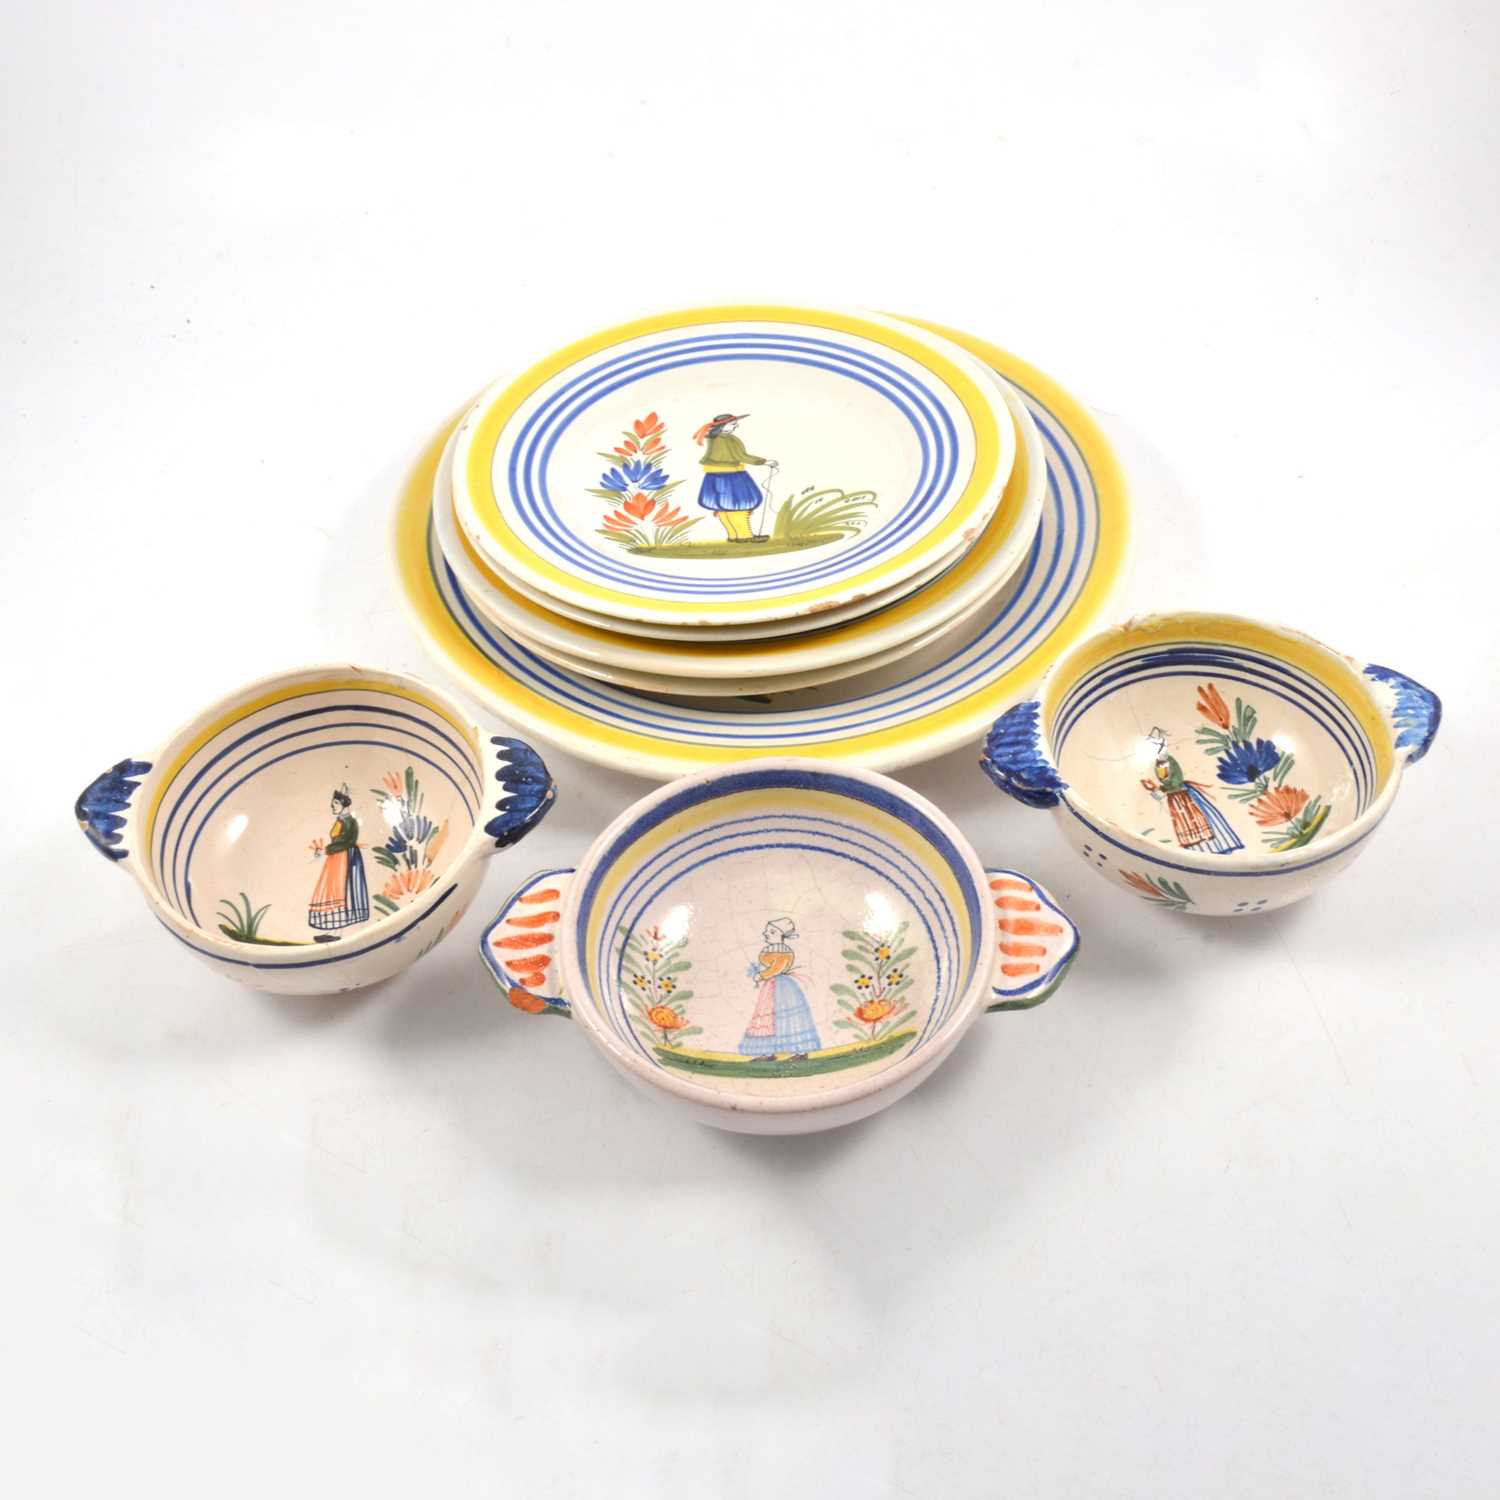 Lot 59 - Quantity of Quimper faience earthenware plates and bowls.